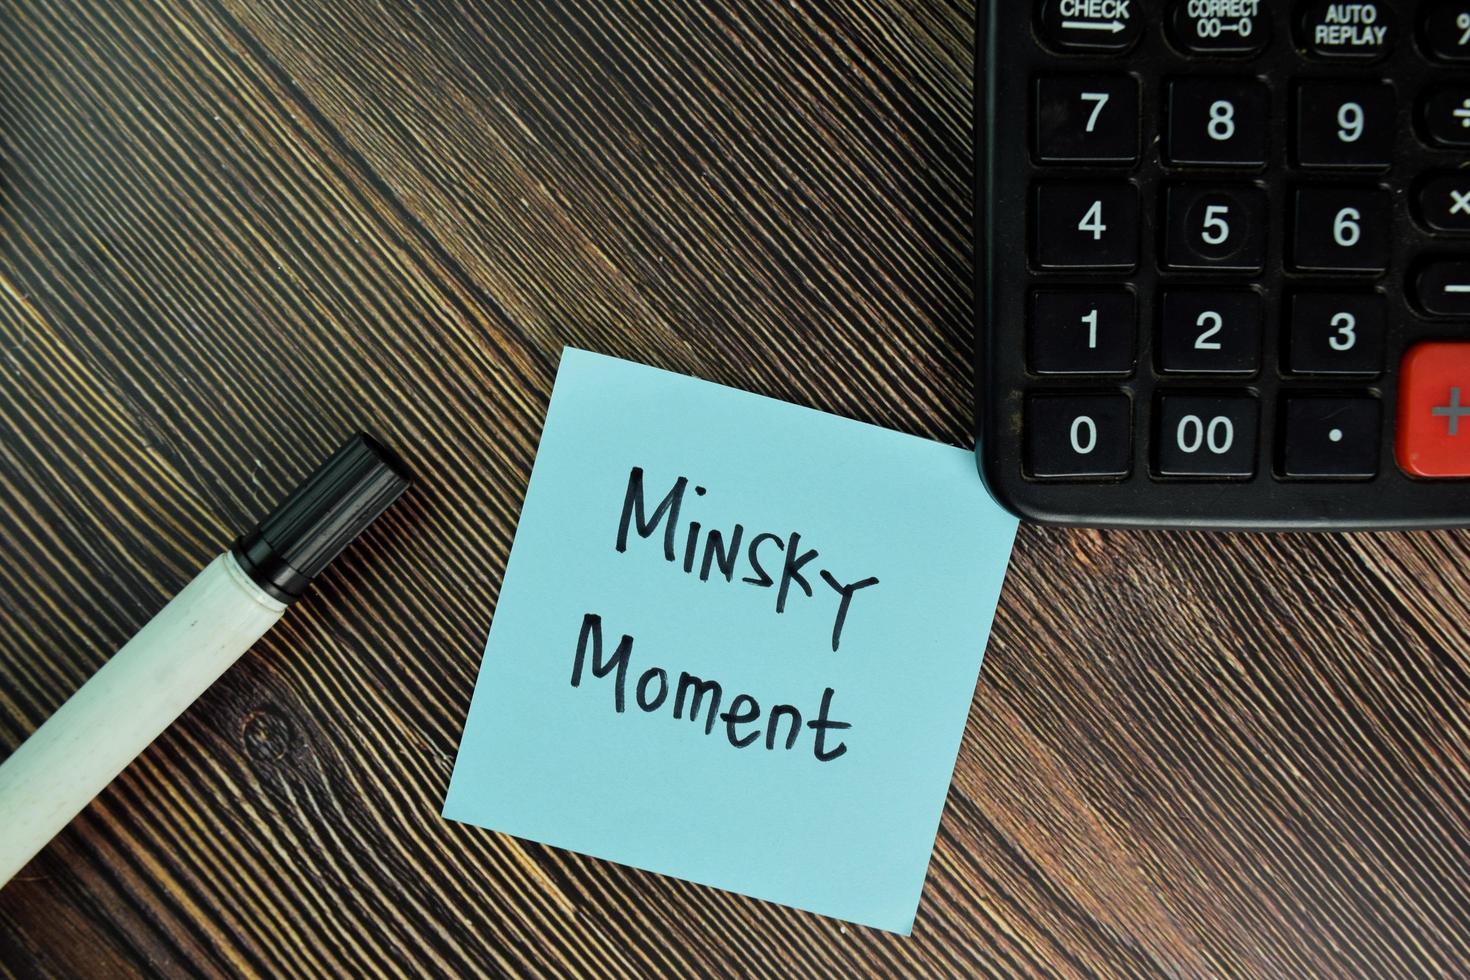 Minsky Moment written on sticky note isolated on wooden table photo